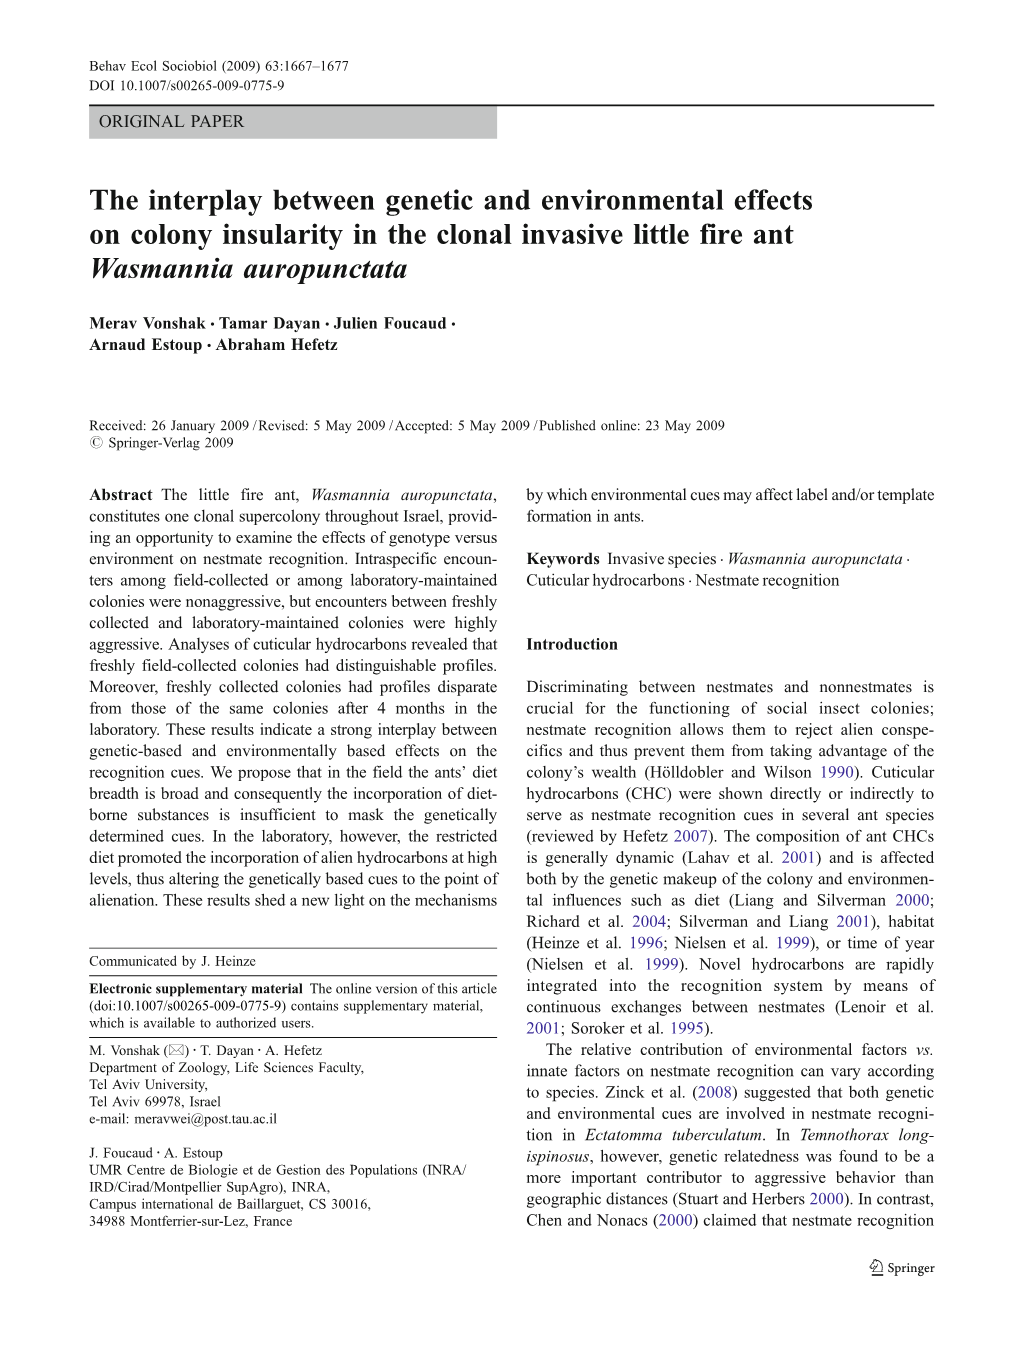 The Interplay Between Genetic and Environmental Effects on Colony Insularity in the Clonal Invasive Little Fire Ant Wasmannia Auropunctata